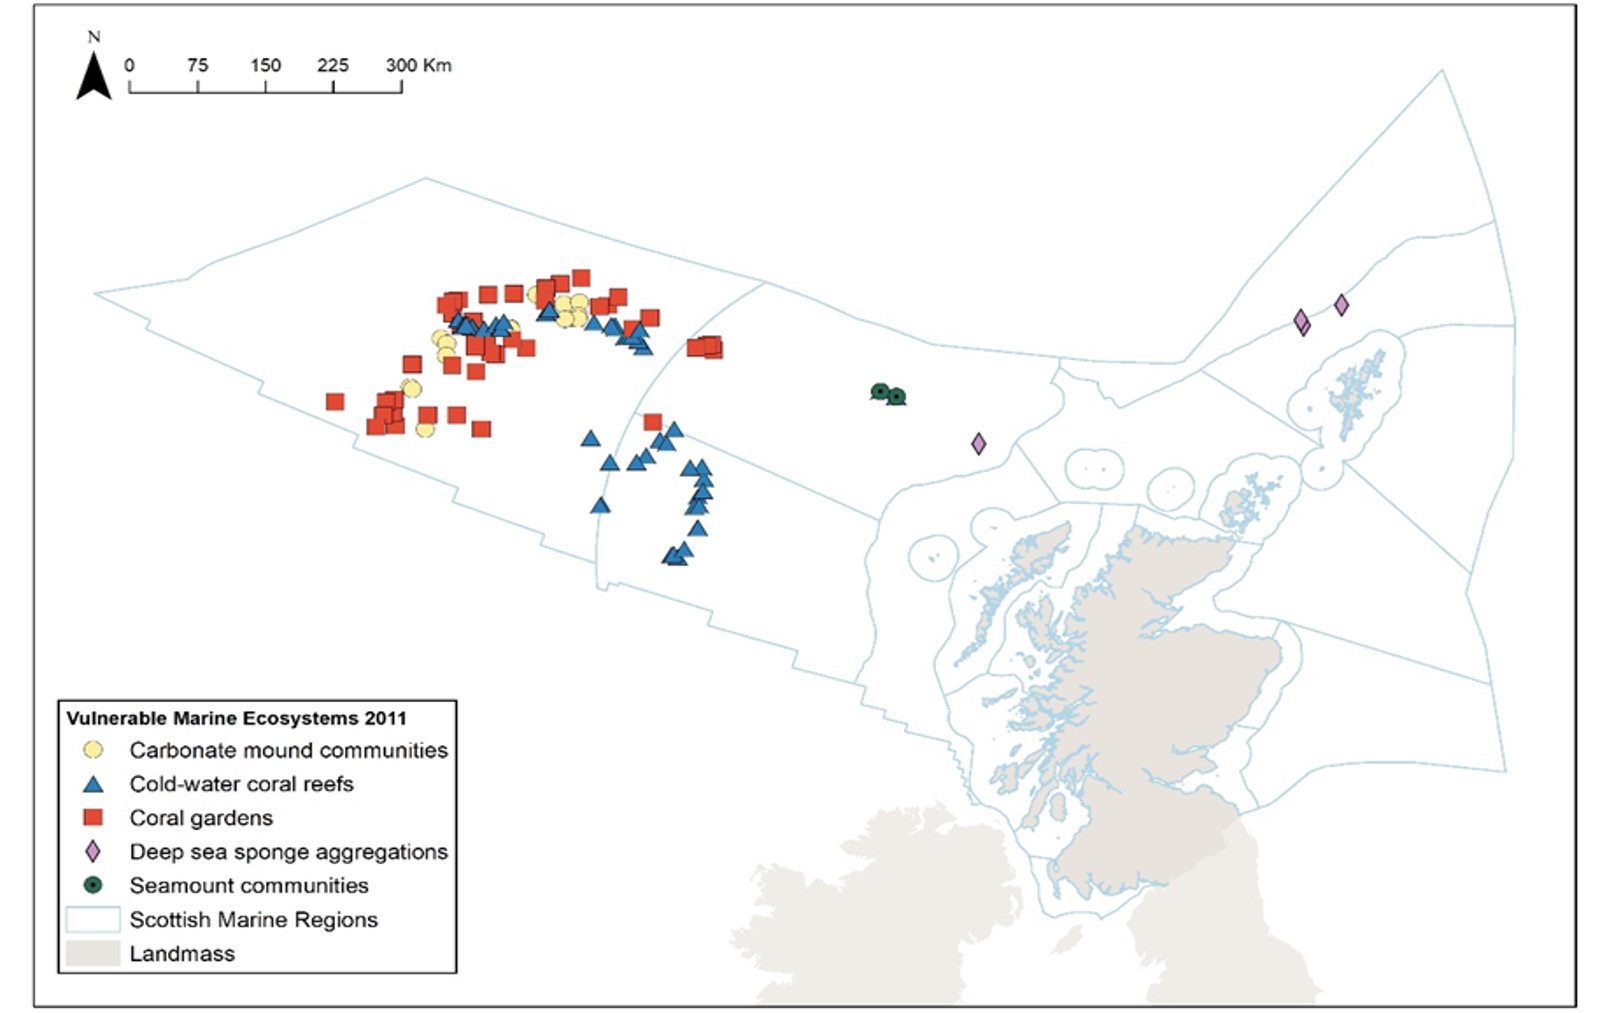 Figure 7. The known extent and distribution of Vulnerable Marine Ecosystems across the deep-waters around Scotland as of 2011 (GeMS: 2011).